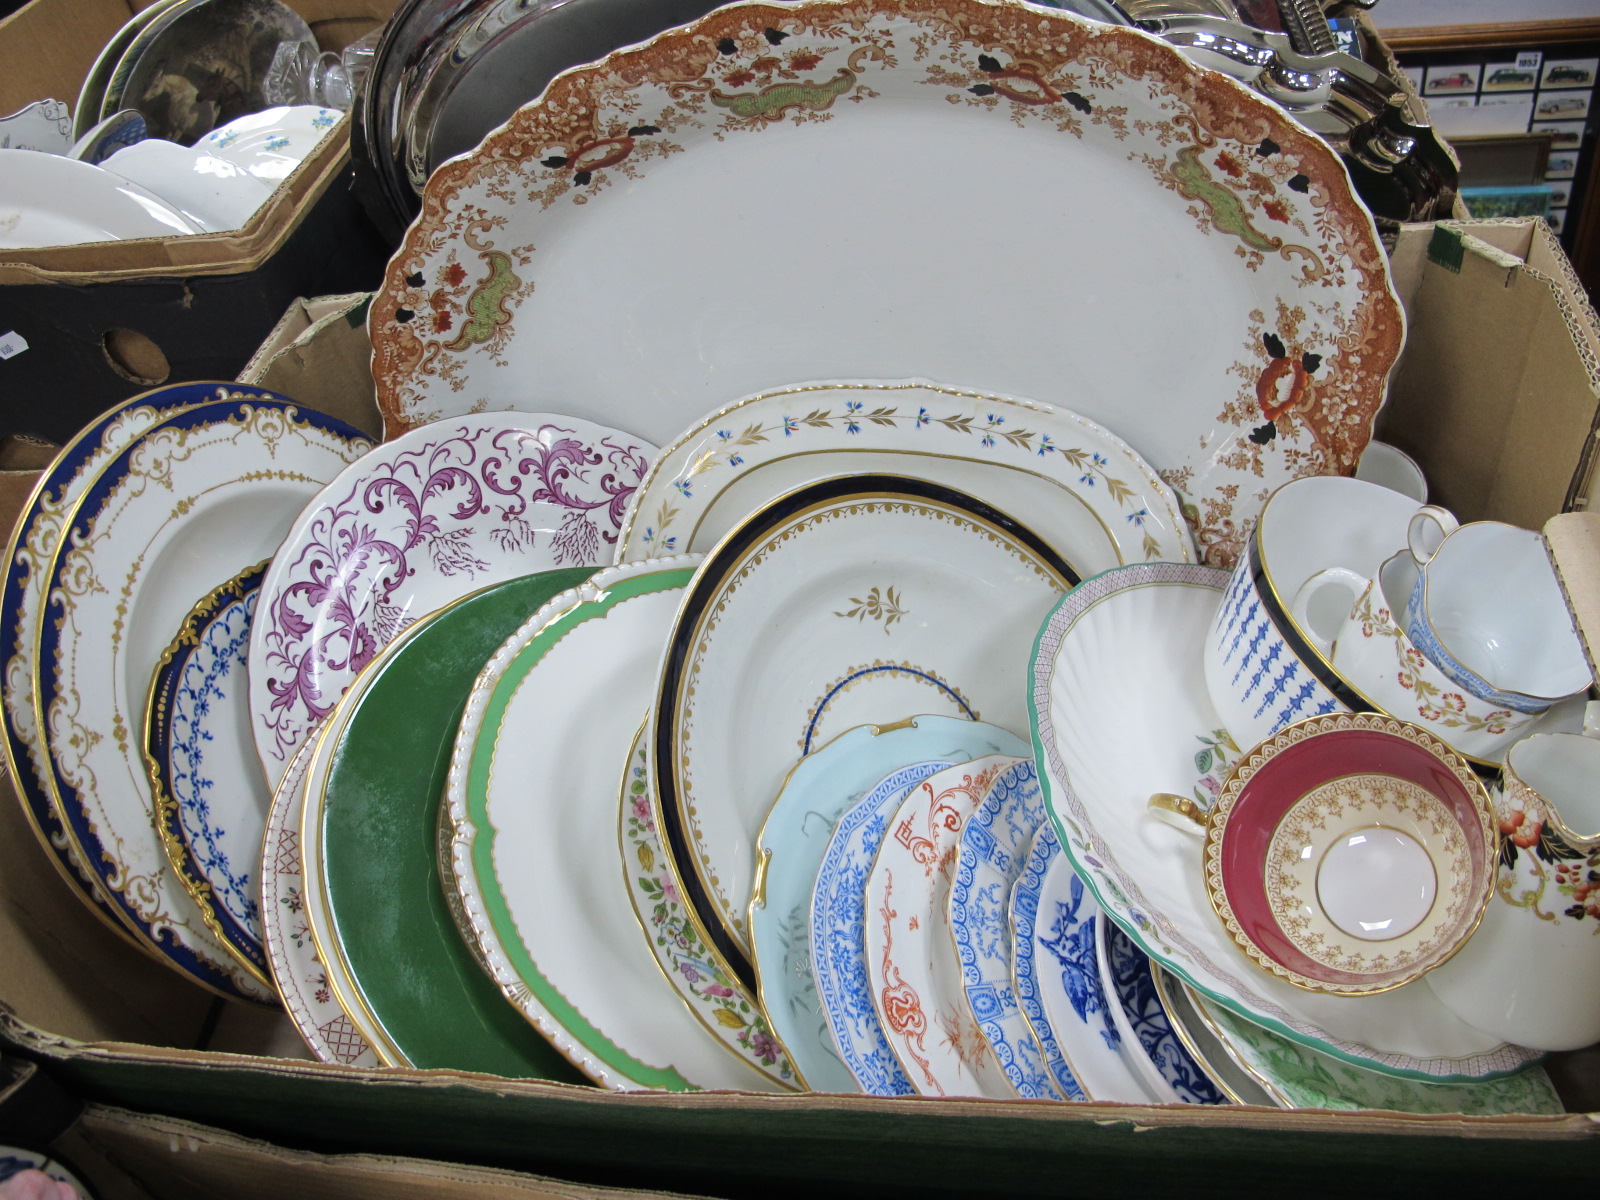 Royal Crown Derby Plates, XIX Century and later, Adams oval meat plate, other ceramics:- One Box